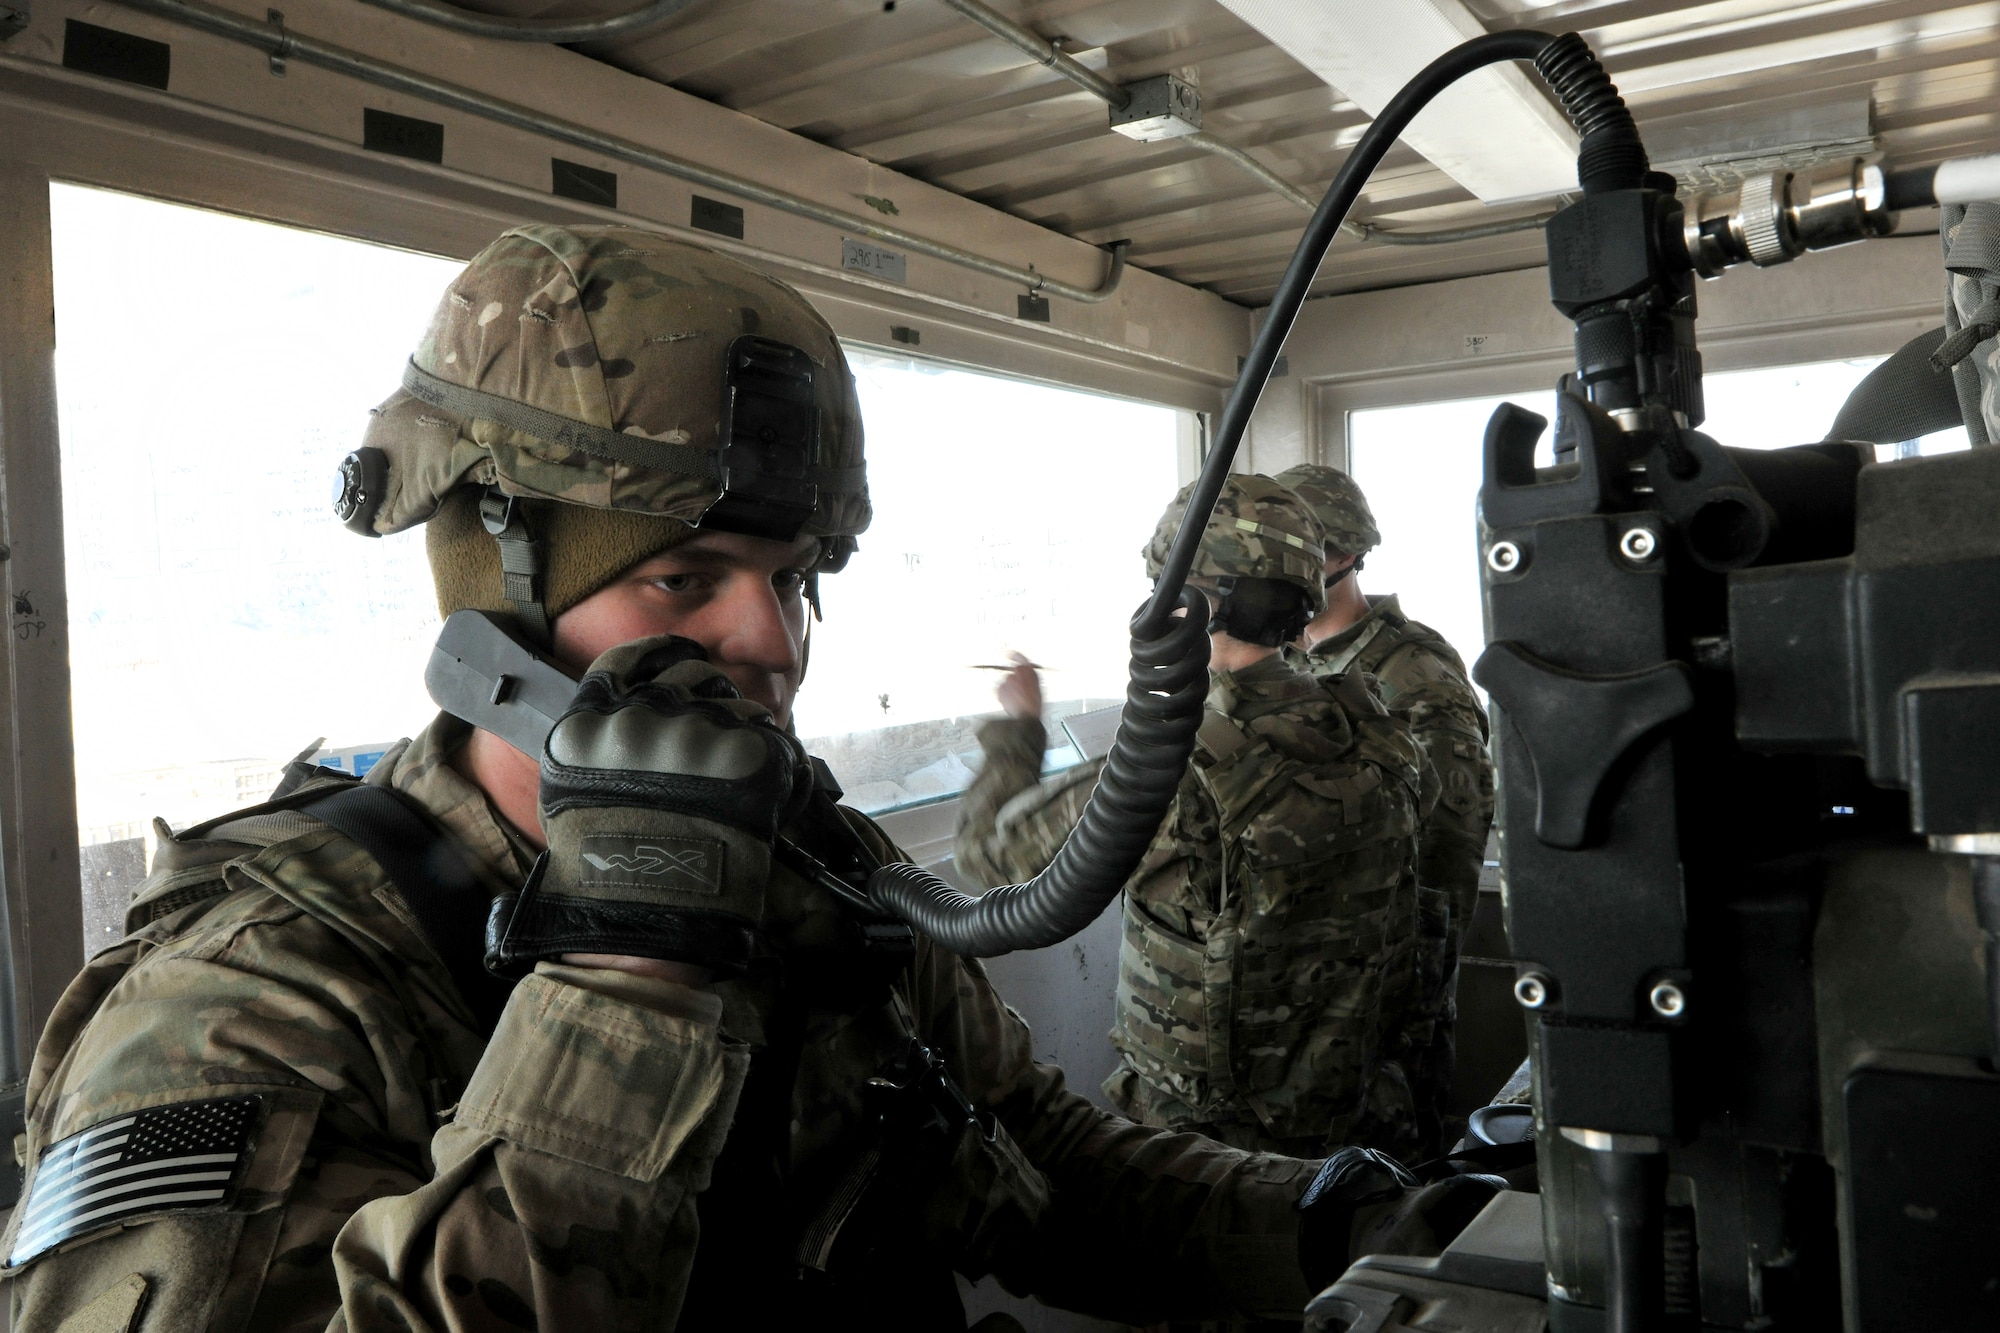 Airman 1st Class Lee Borytsky, 455th Expeditionary Security Forces Squadron defender, performs an operational radio check in a guard tower on Bagram Airfield, Afghanistan, Jan. 10, 2013. The 455th ESFS have multiple tools at their disposal, such as the ability to call in a linguist to speak to interlopers who stray too close to the perimeter. (U.S. Air Force photo/Senior Airman Chris Willis)